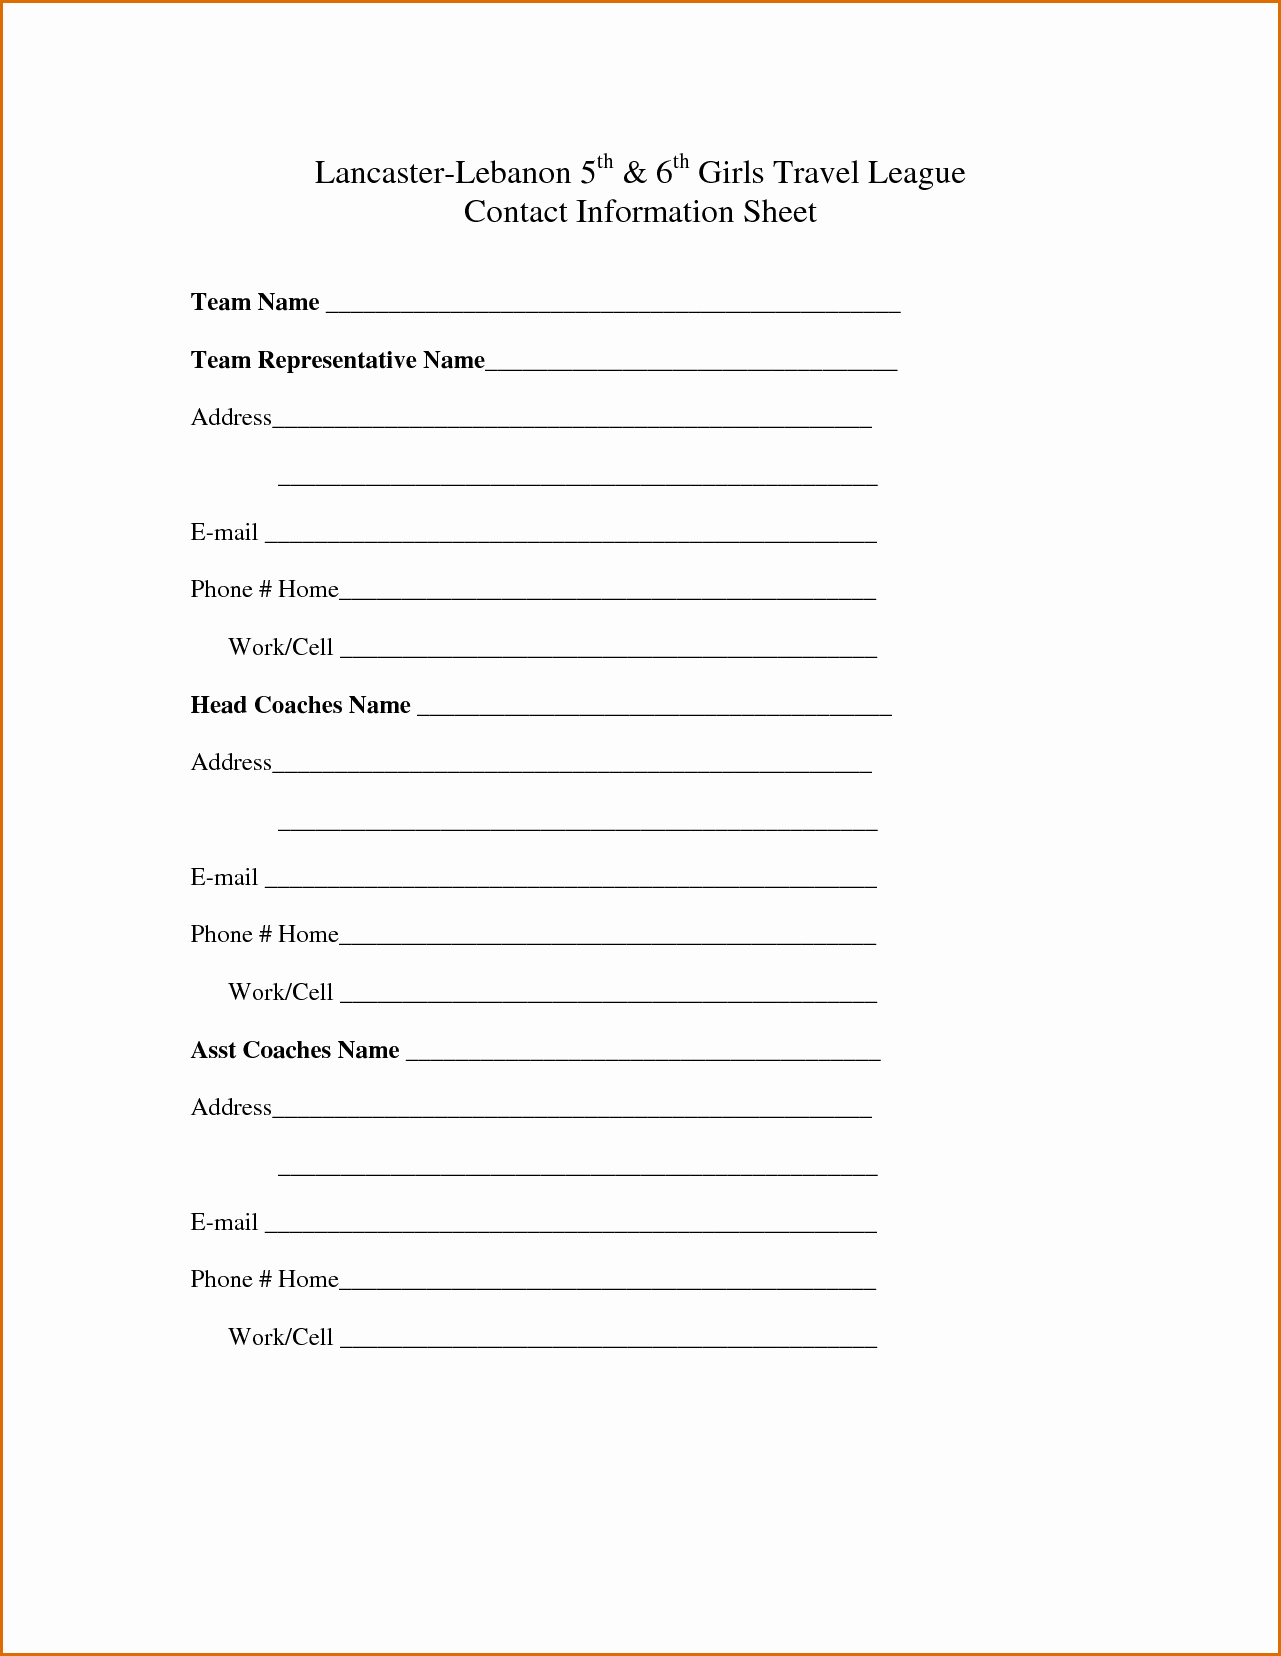 Contact Information form Template Lovely 6 Contact Information Sheet